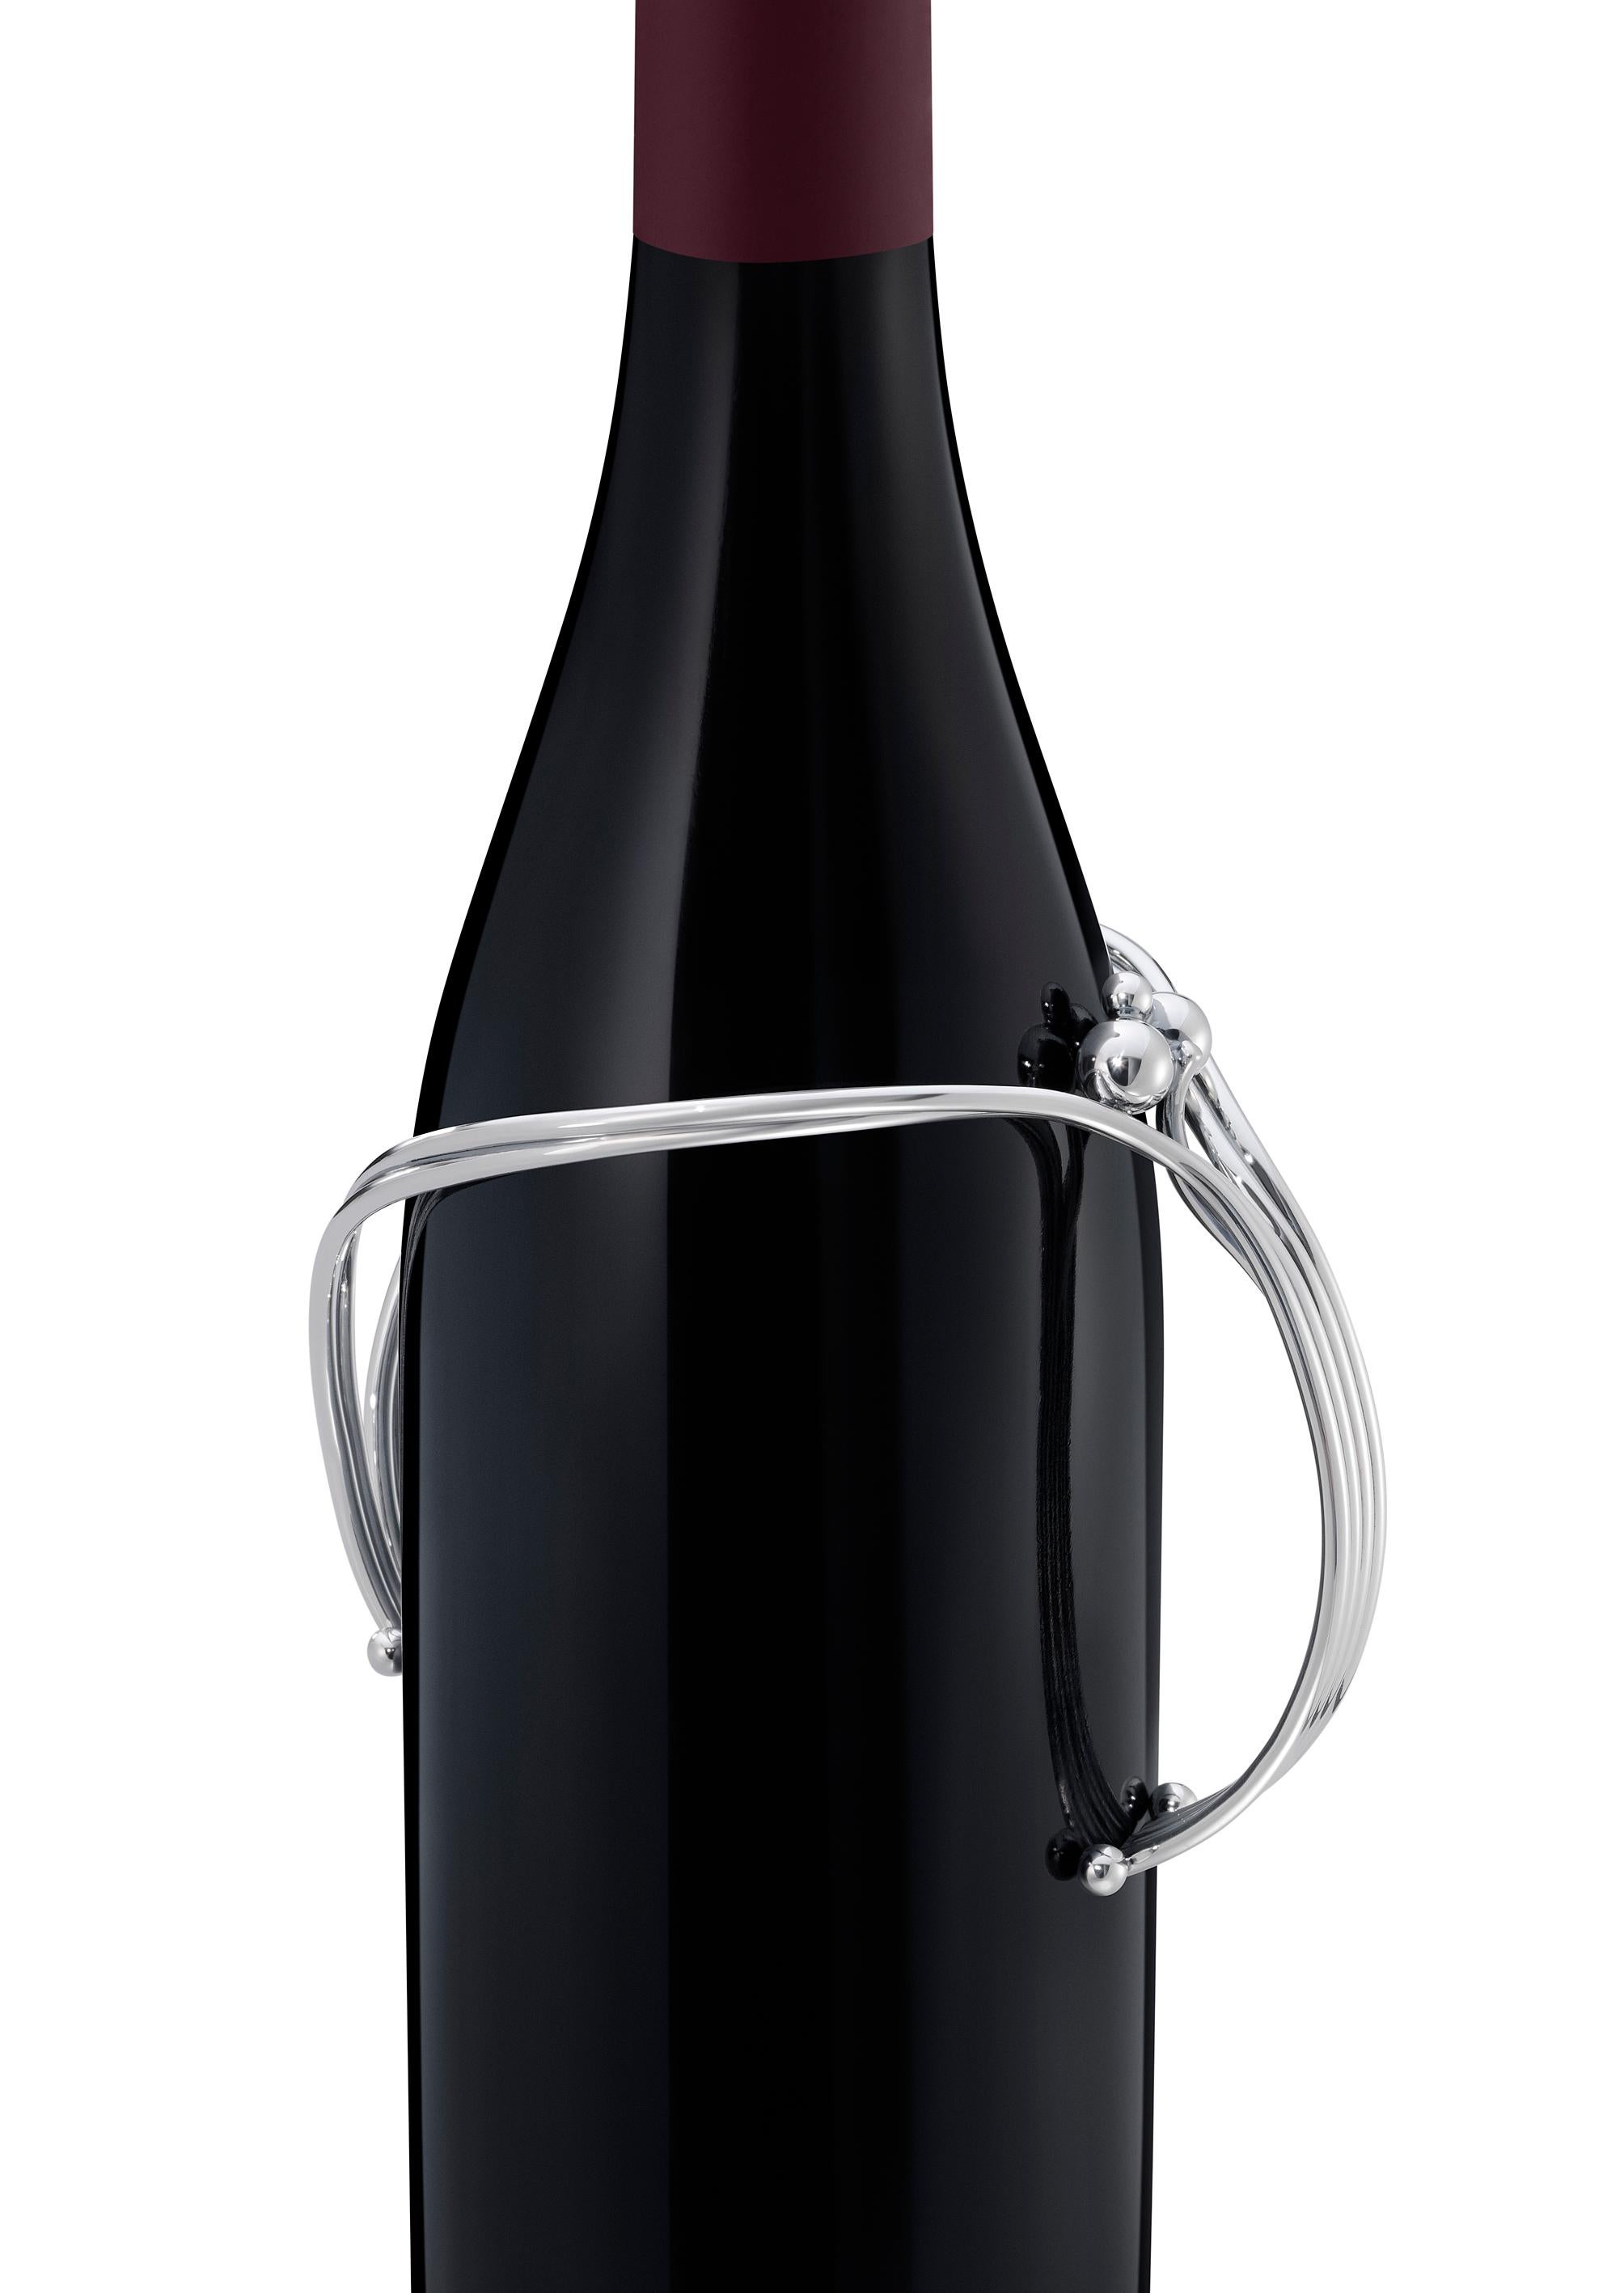 Classic Harald Nielsen wine bottle holder. Fits over a standard wine bottle making a handle to pour with.
 